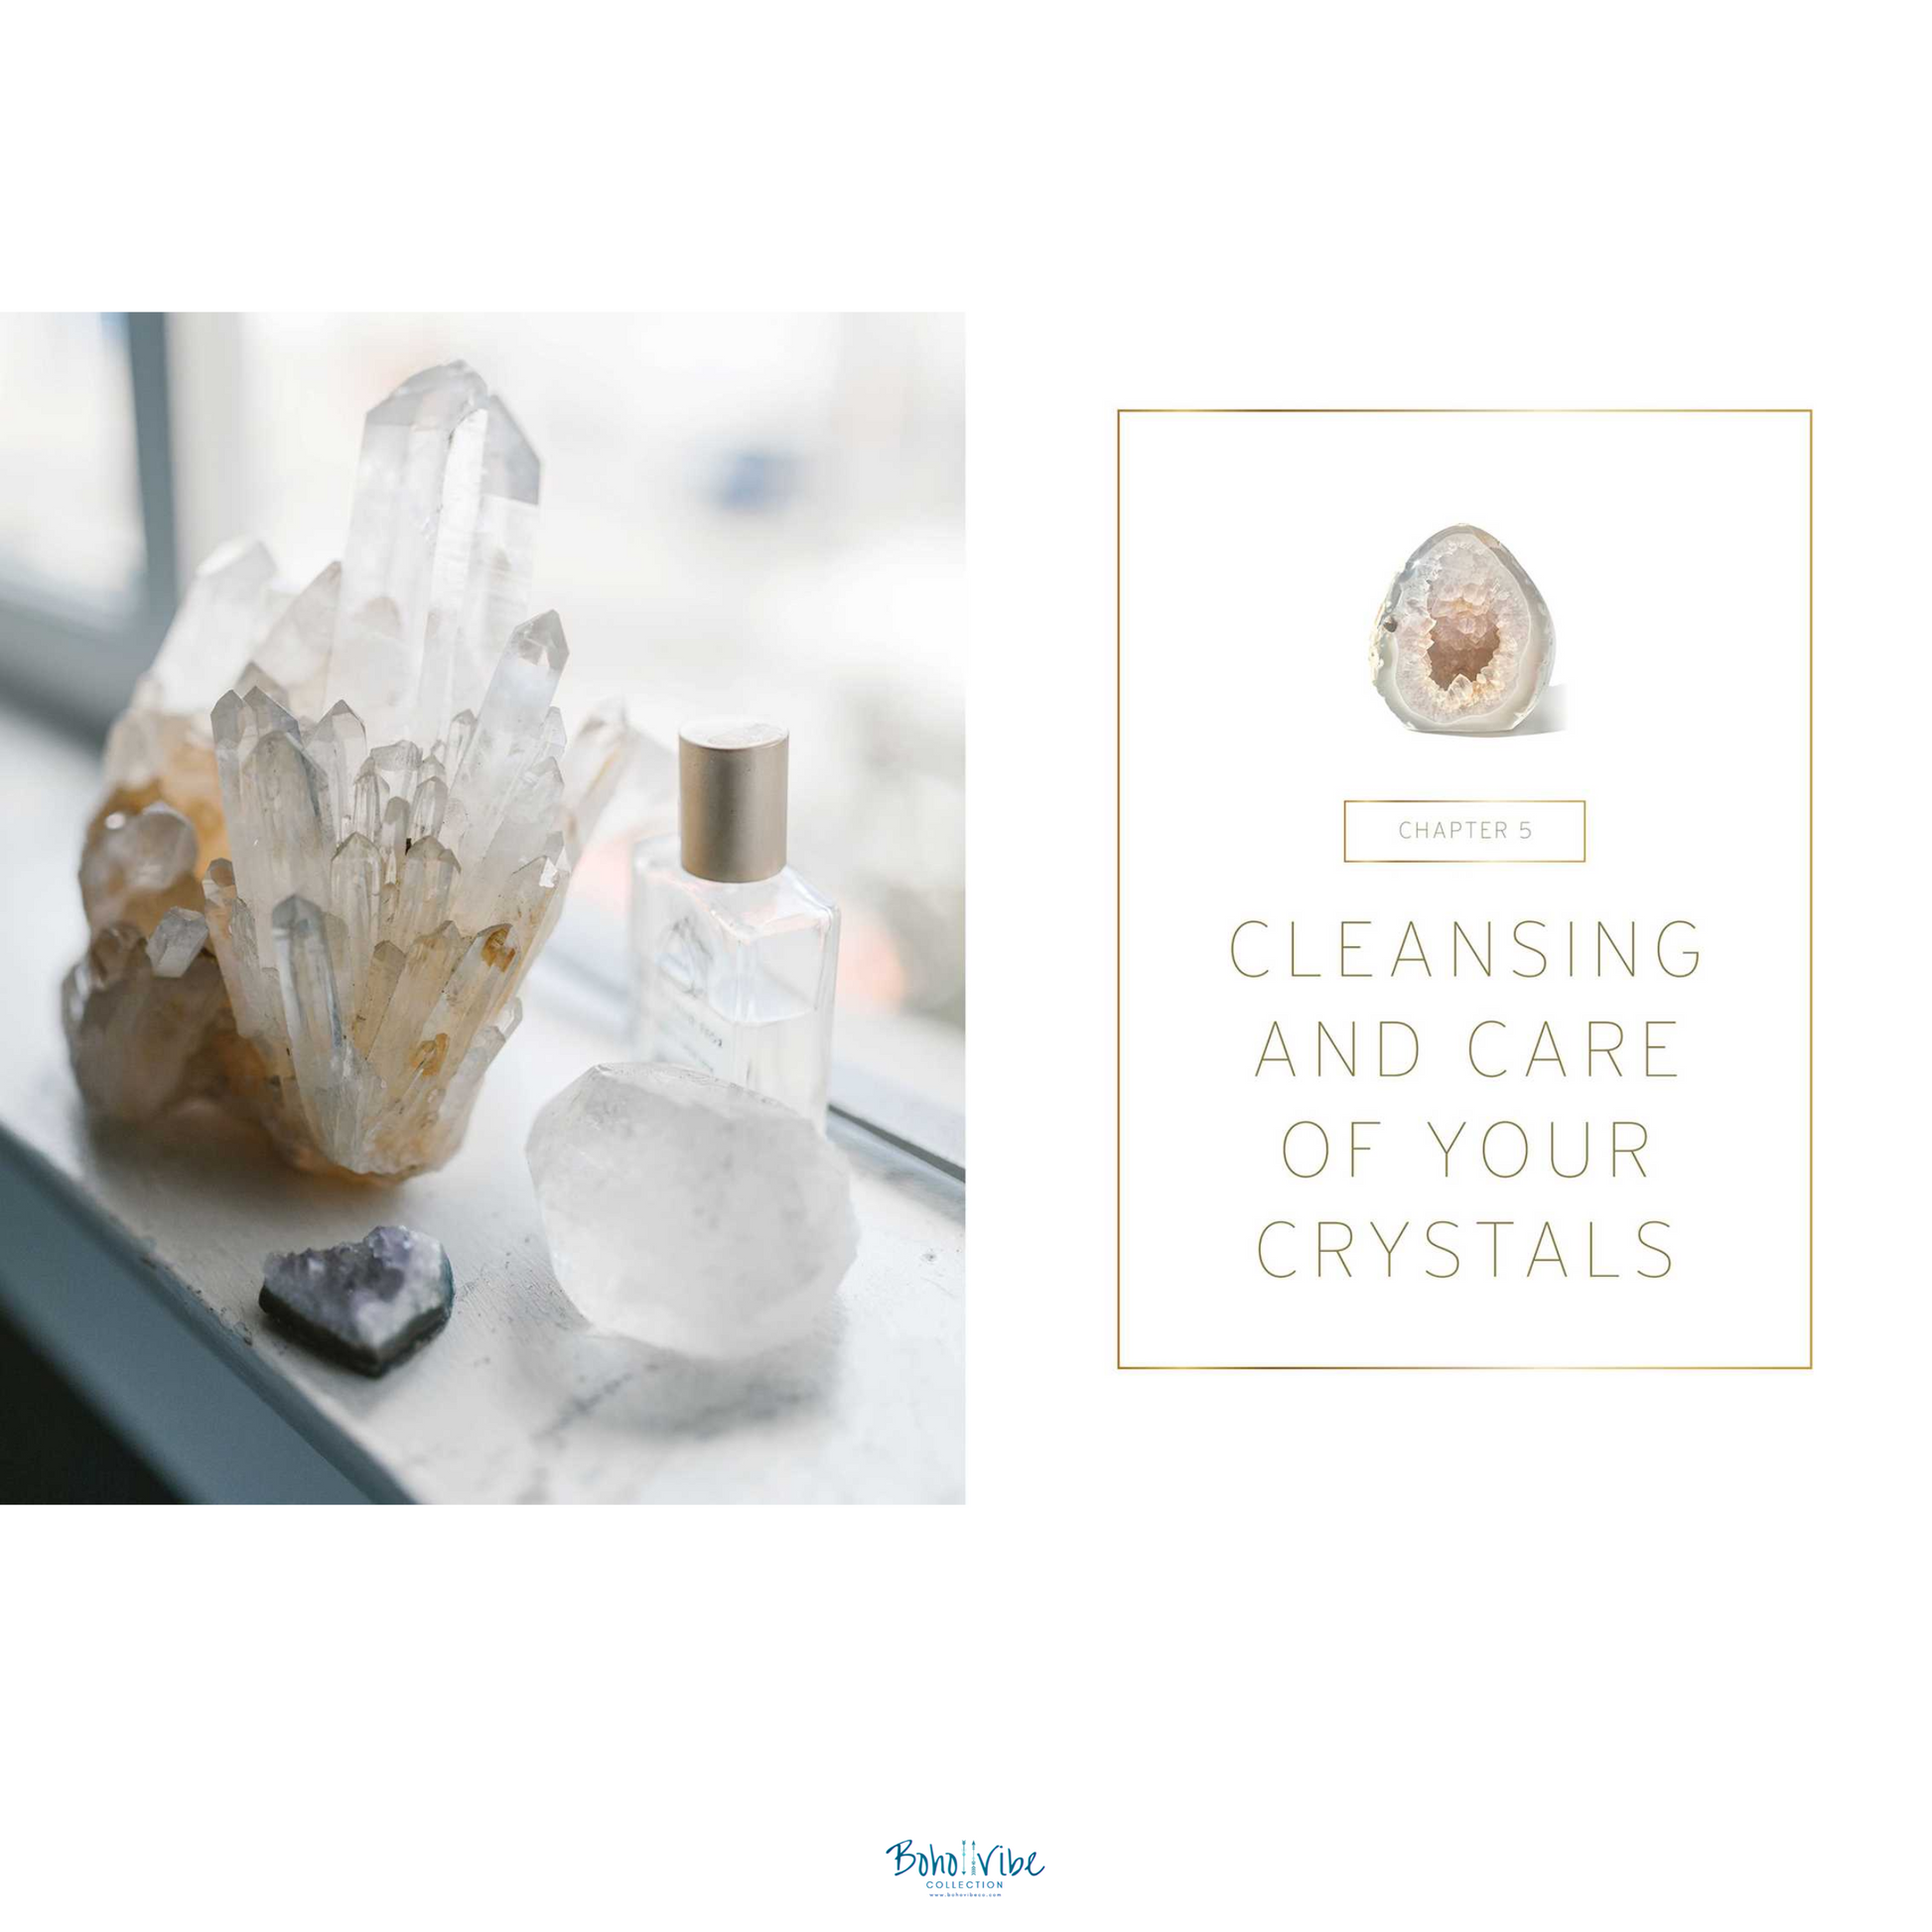 Boho ↡↟ Vibe Collection ↠ Crystal Companions: An A-Z Guide